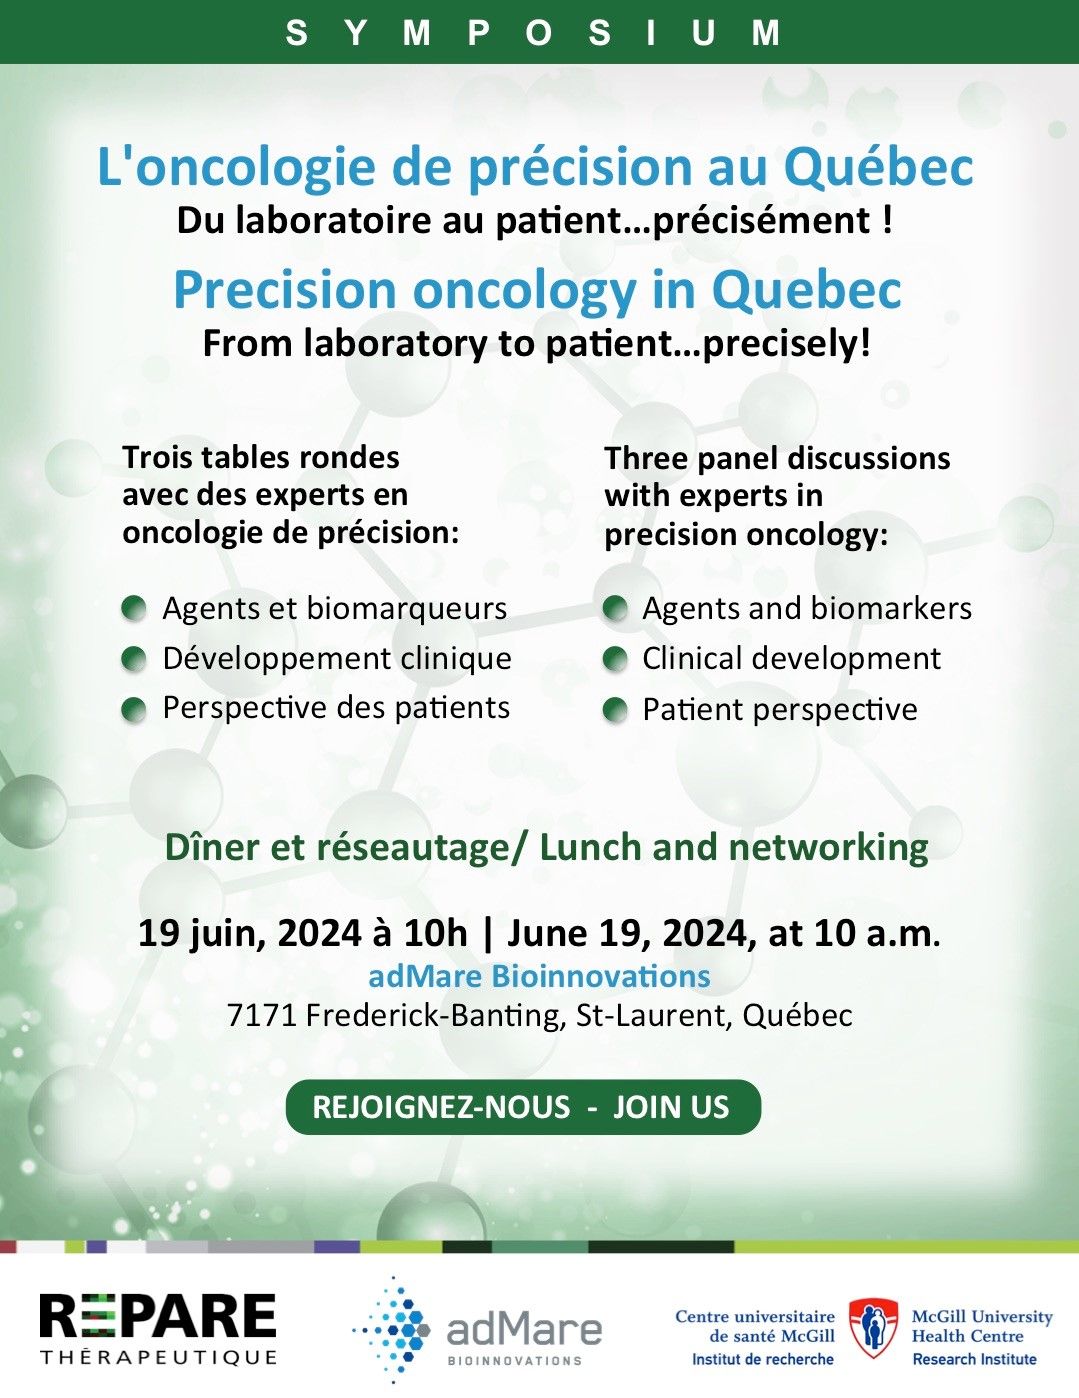 Symposium : Precision oncology in Quebec - From laboratory to patient... precisely!